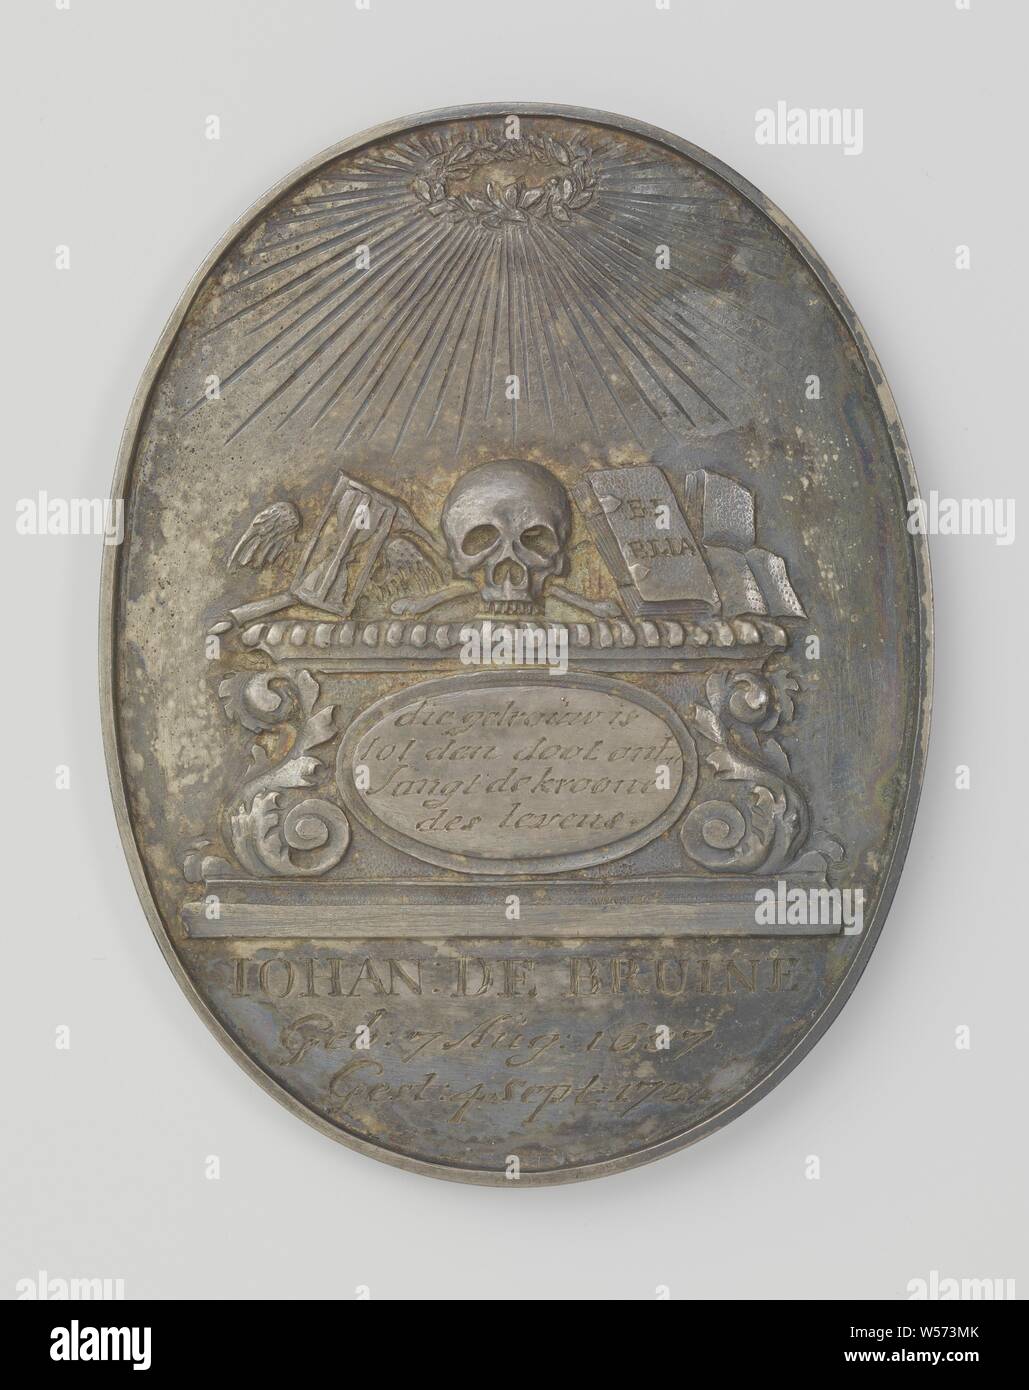 Death of Johannes de Bruine, pastor in De Knipe, Staveren, Sluis, Wezel, Dordrecht and The Hague, Silver oval medal. Obverse: skull, extinguished torch, winged hourglass, bible and other books on altar with medallion with inscription, above it radiant olive wreath, cut off: inscription. Reverse: inscription, below mark and master marks, De Knipe, Stavoren, Wesel, Dordrecht, The Hague, Johannes de Bruine, Tielman Sluyter, Netherlands, 1722, silver (metal), striking (metalworking), l 7.3 cm × w 5.7 cm × w 500 Stock Photo